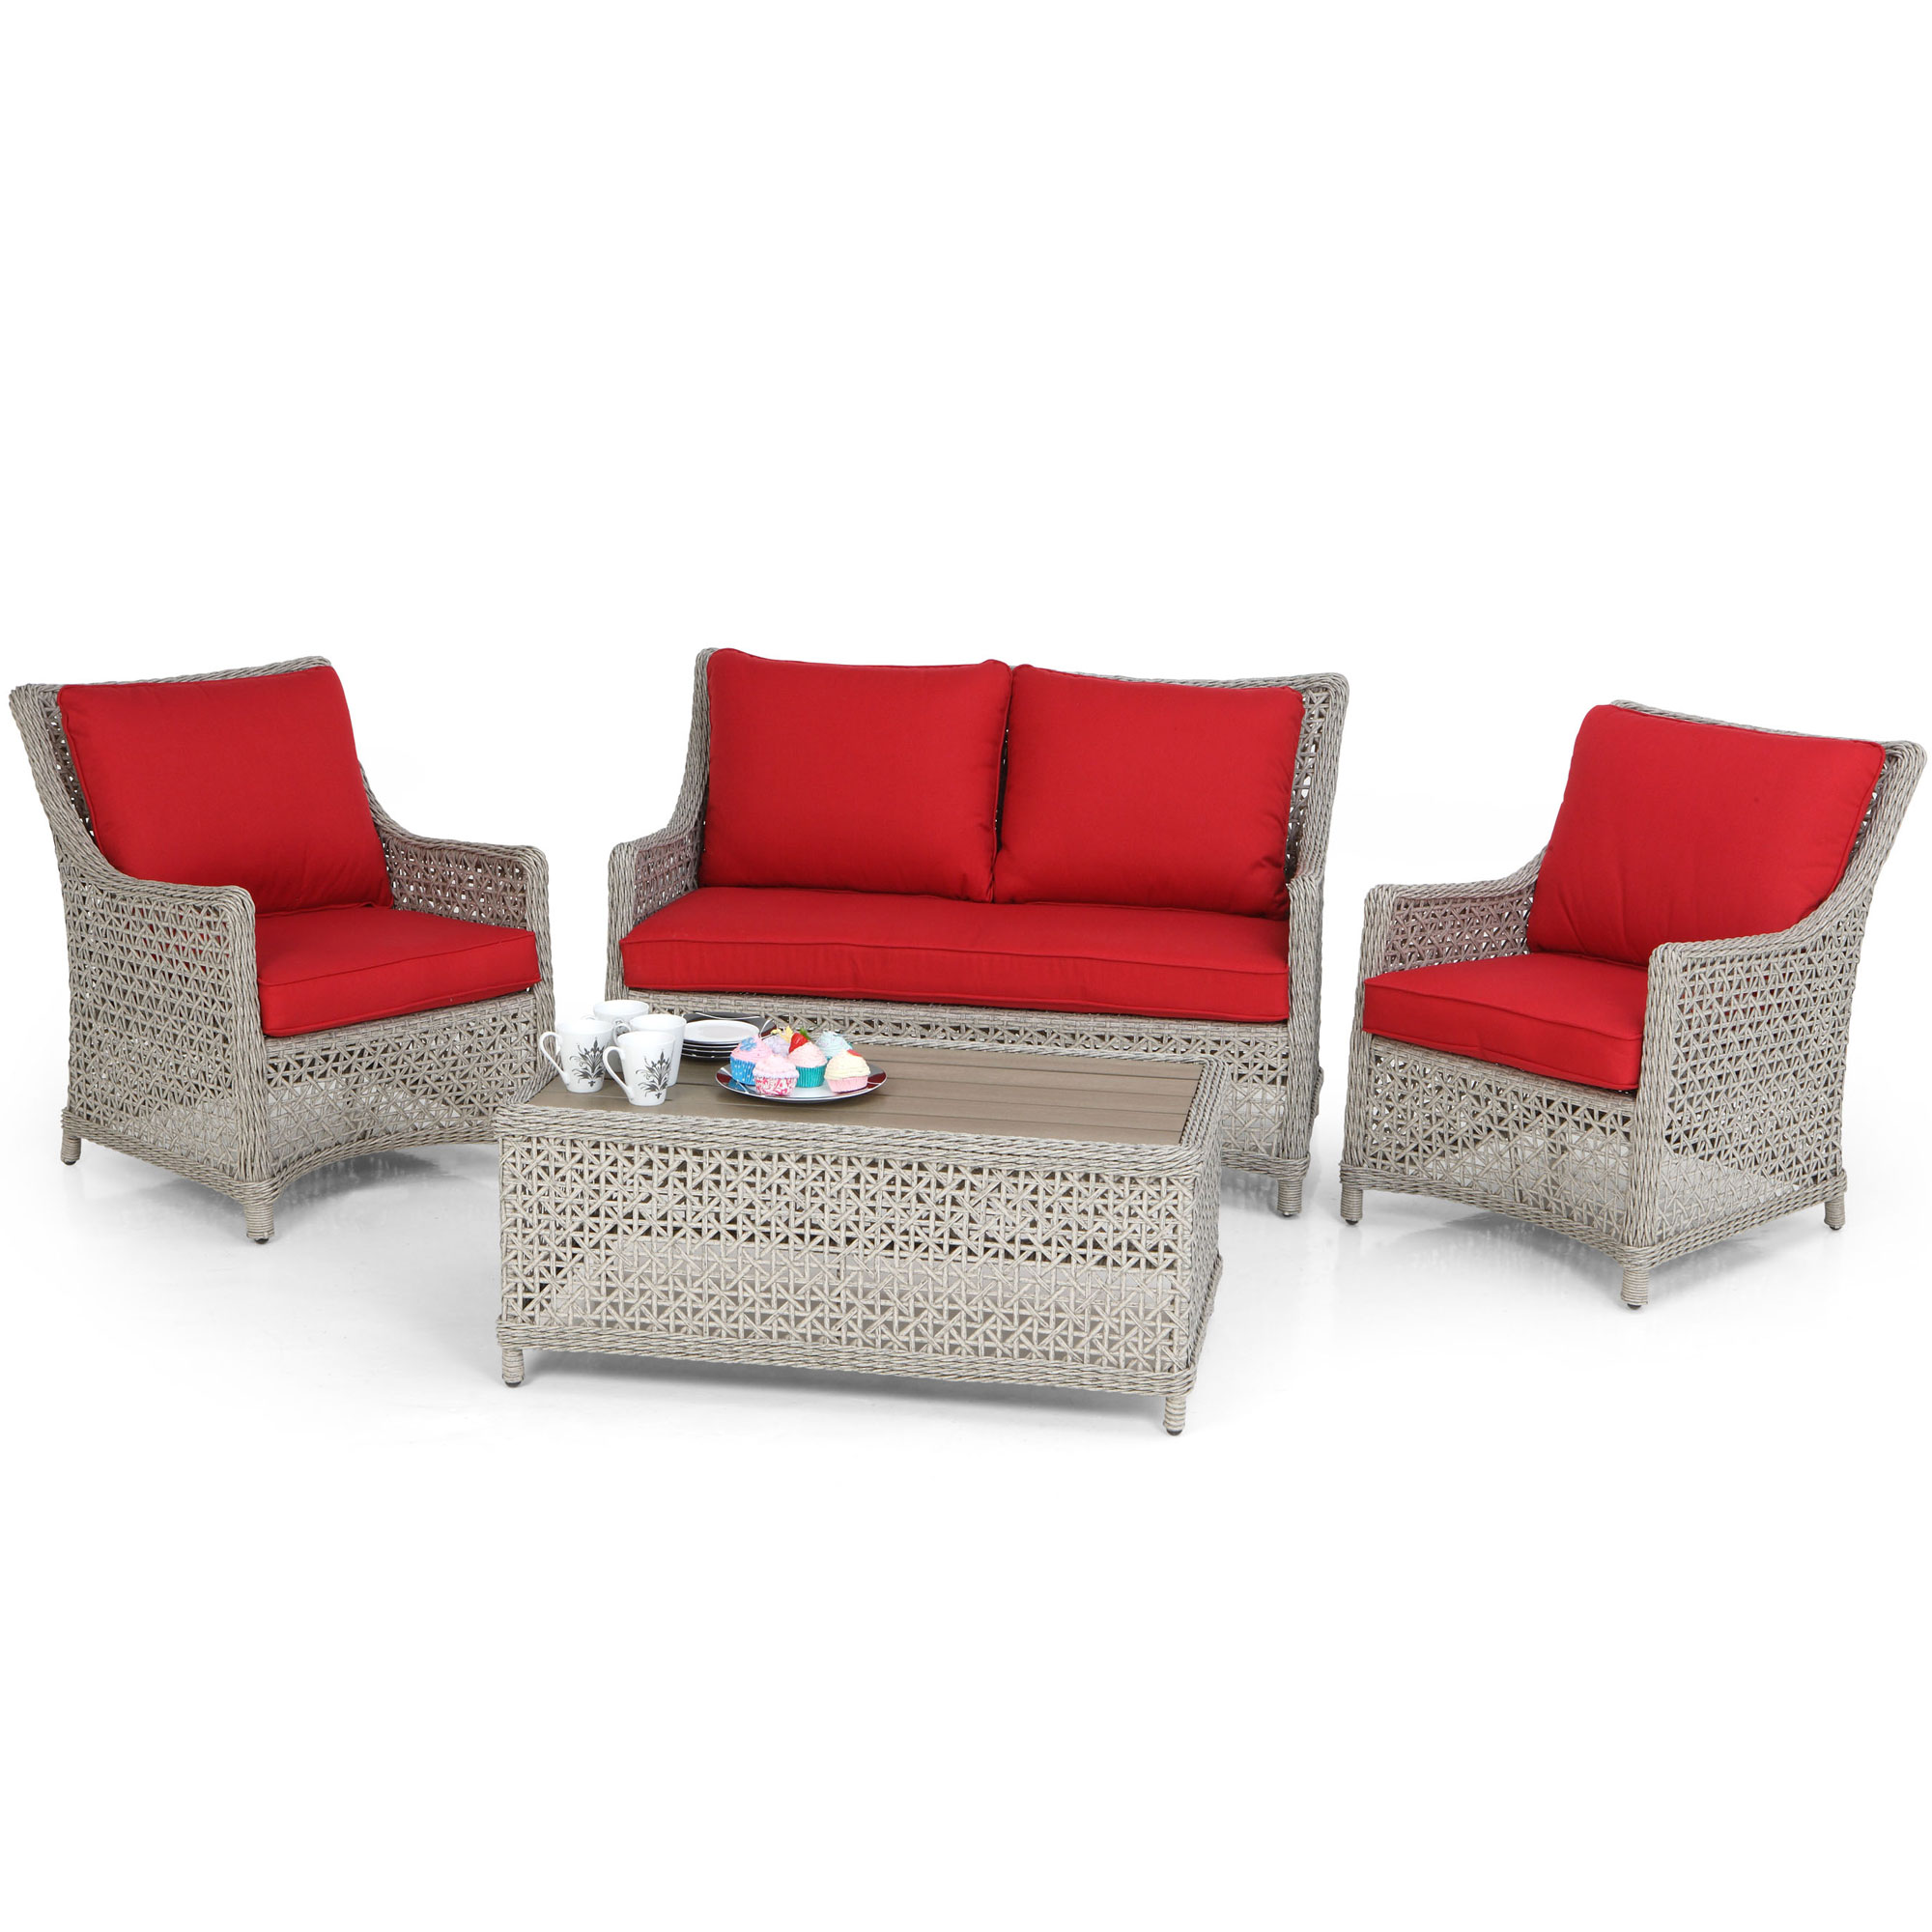 Antibes 4 Piece Sofa and Coffee Table Furniture